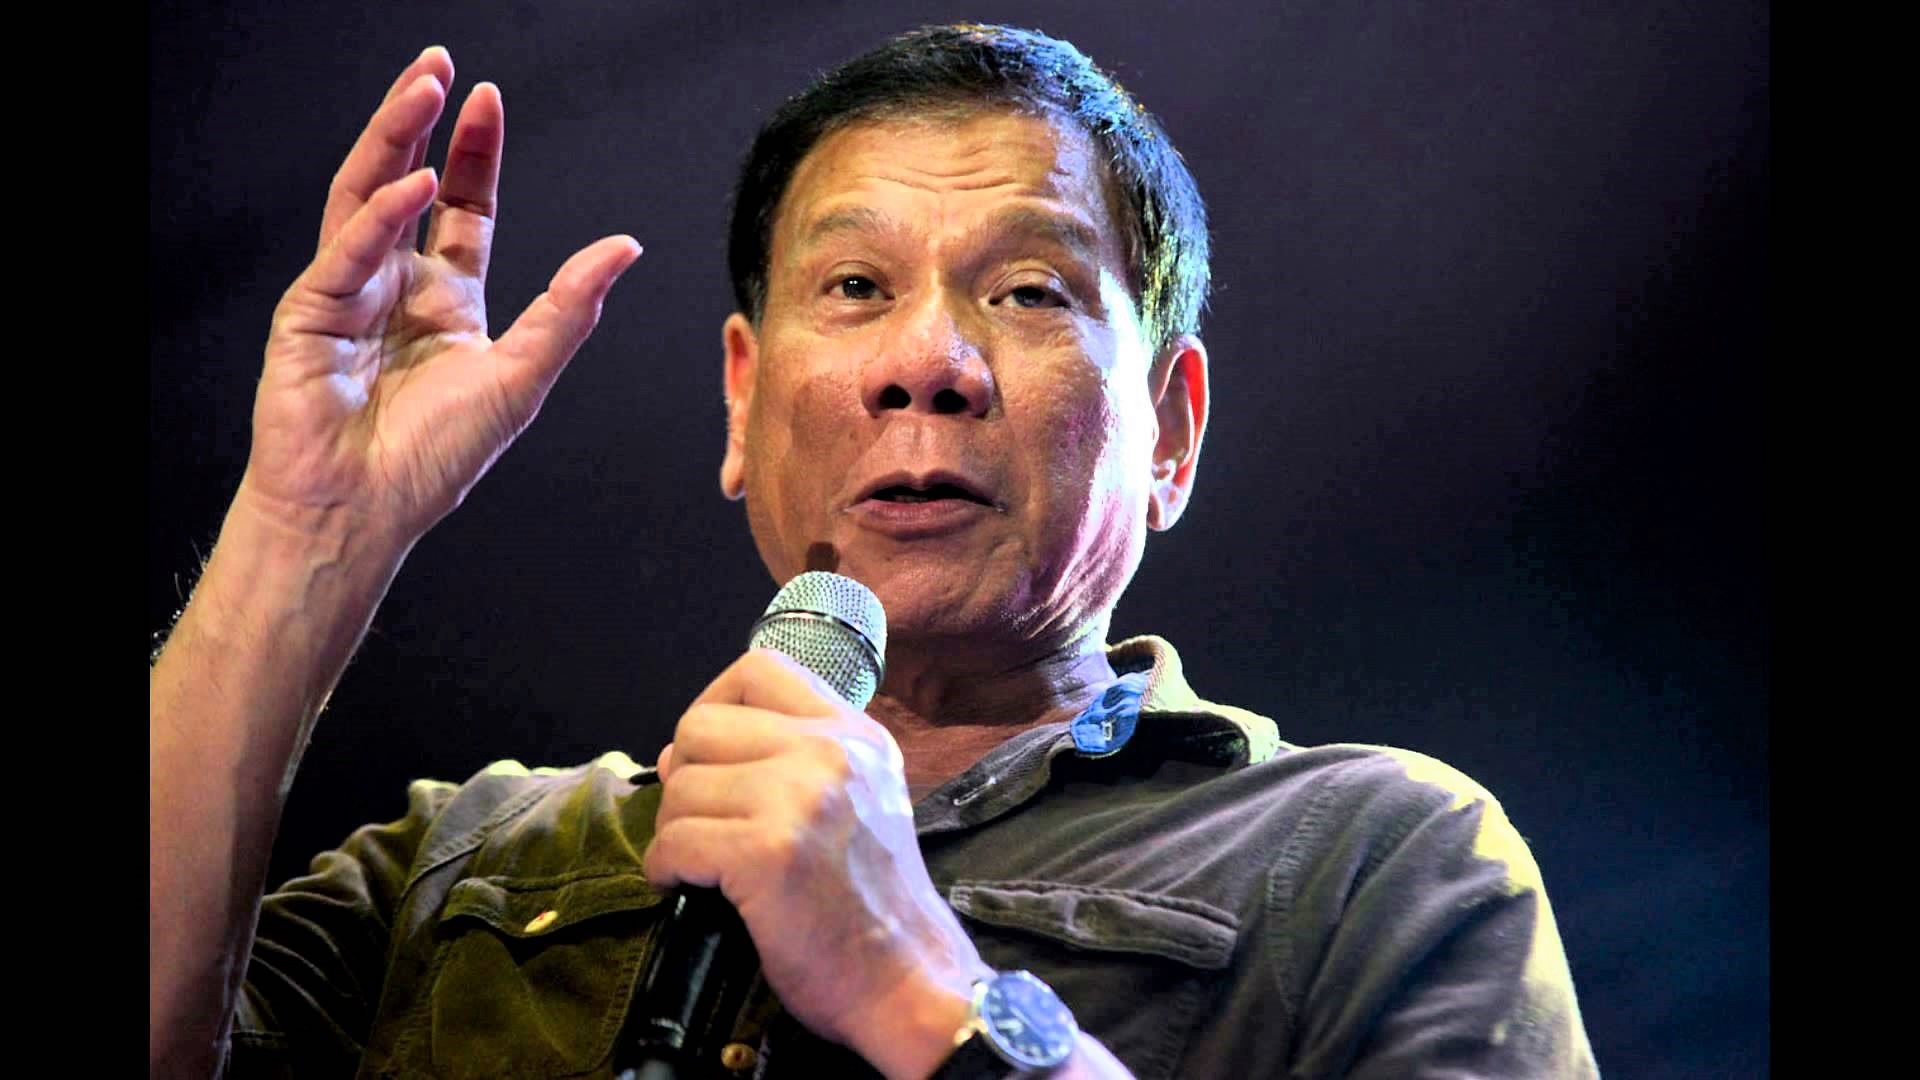 I'll Eat Your Liver': Duterte Vows to Punish Islamist Terrorists